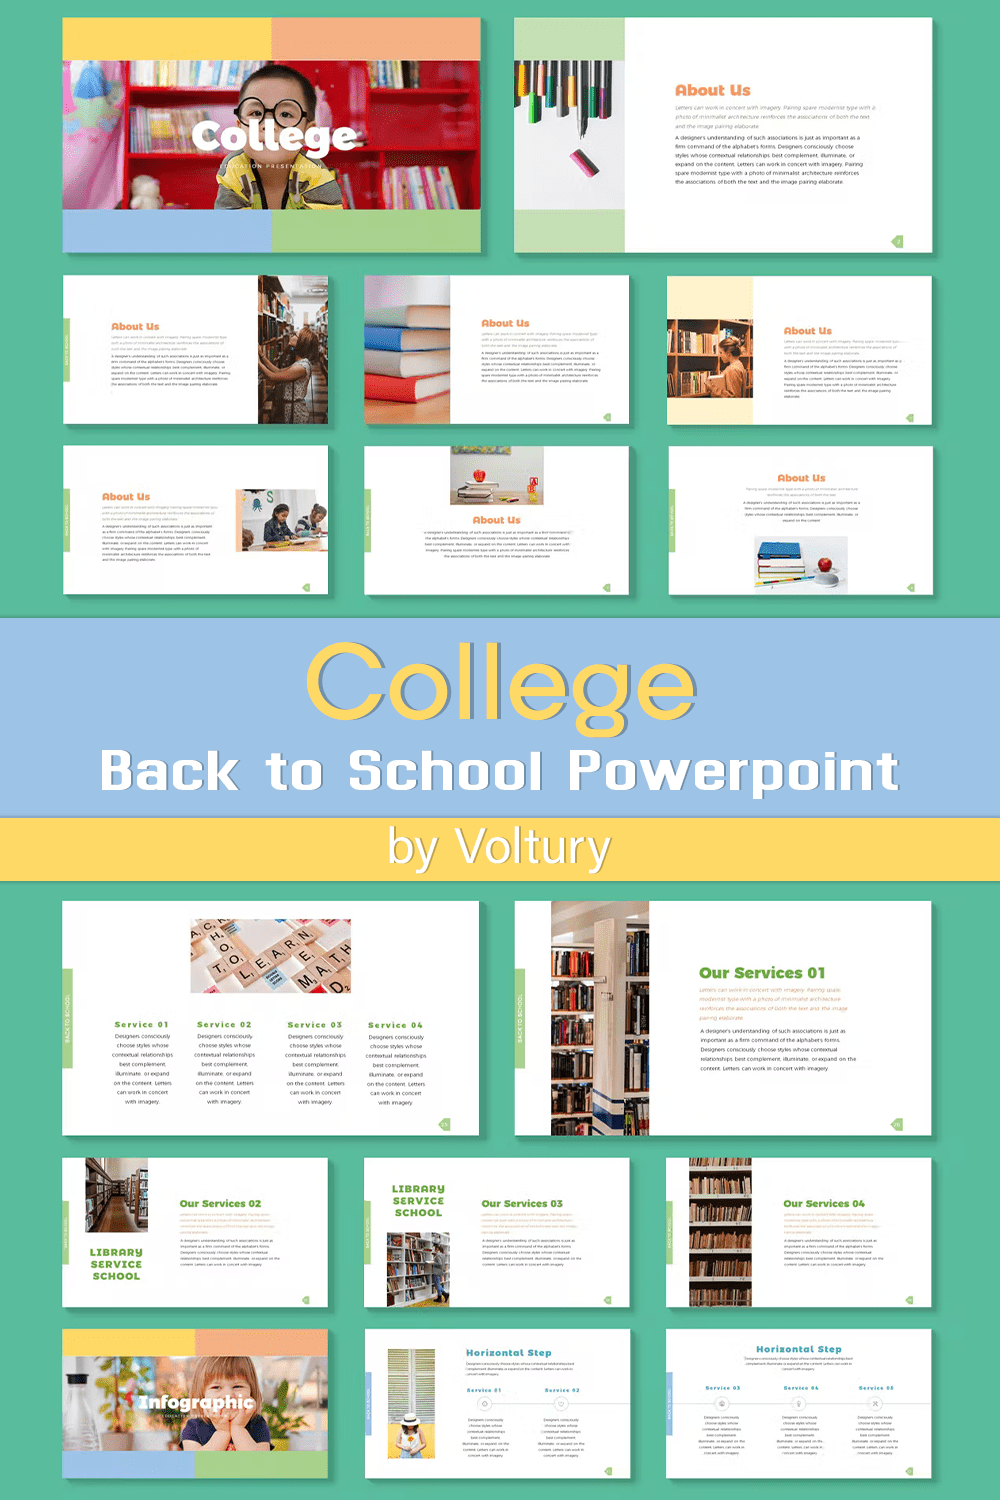 College Back to School Powerpoint - pinterest image preview.